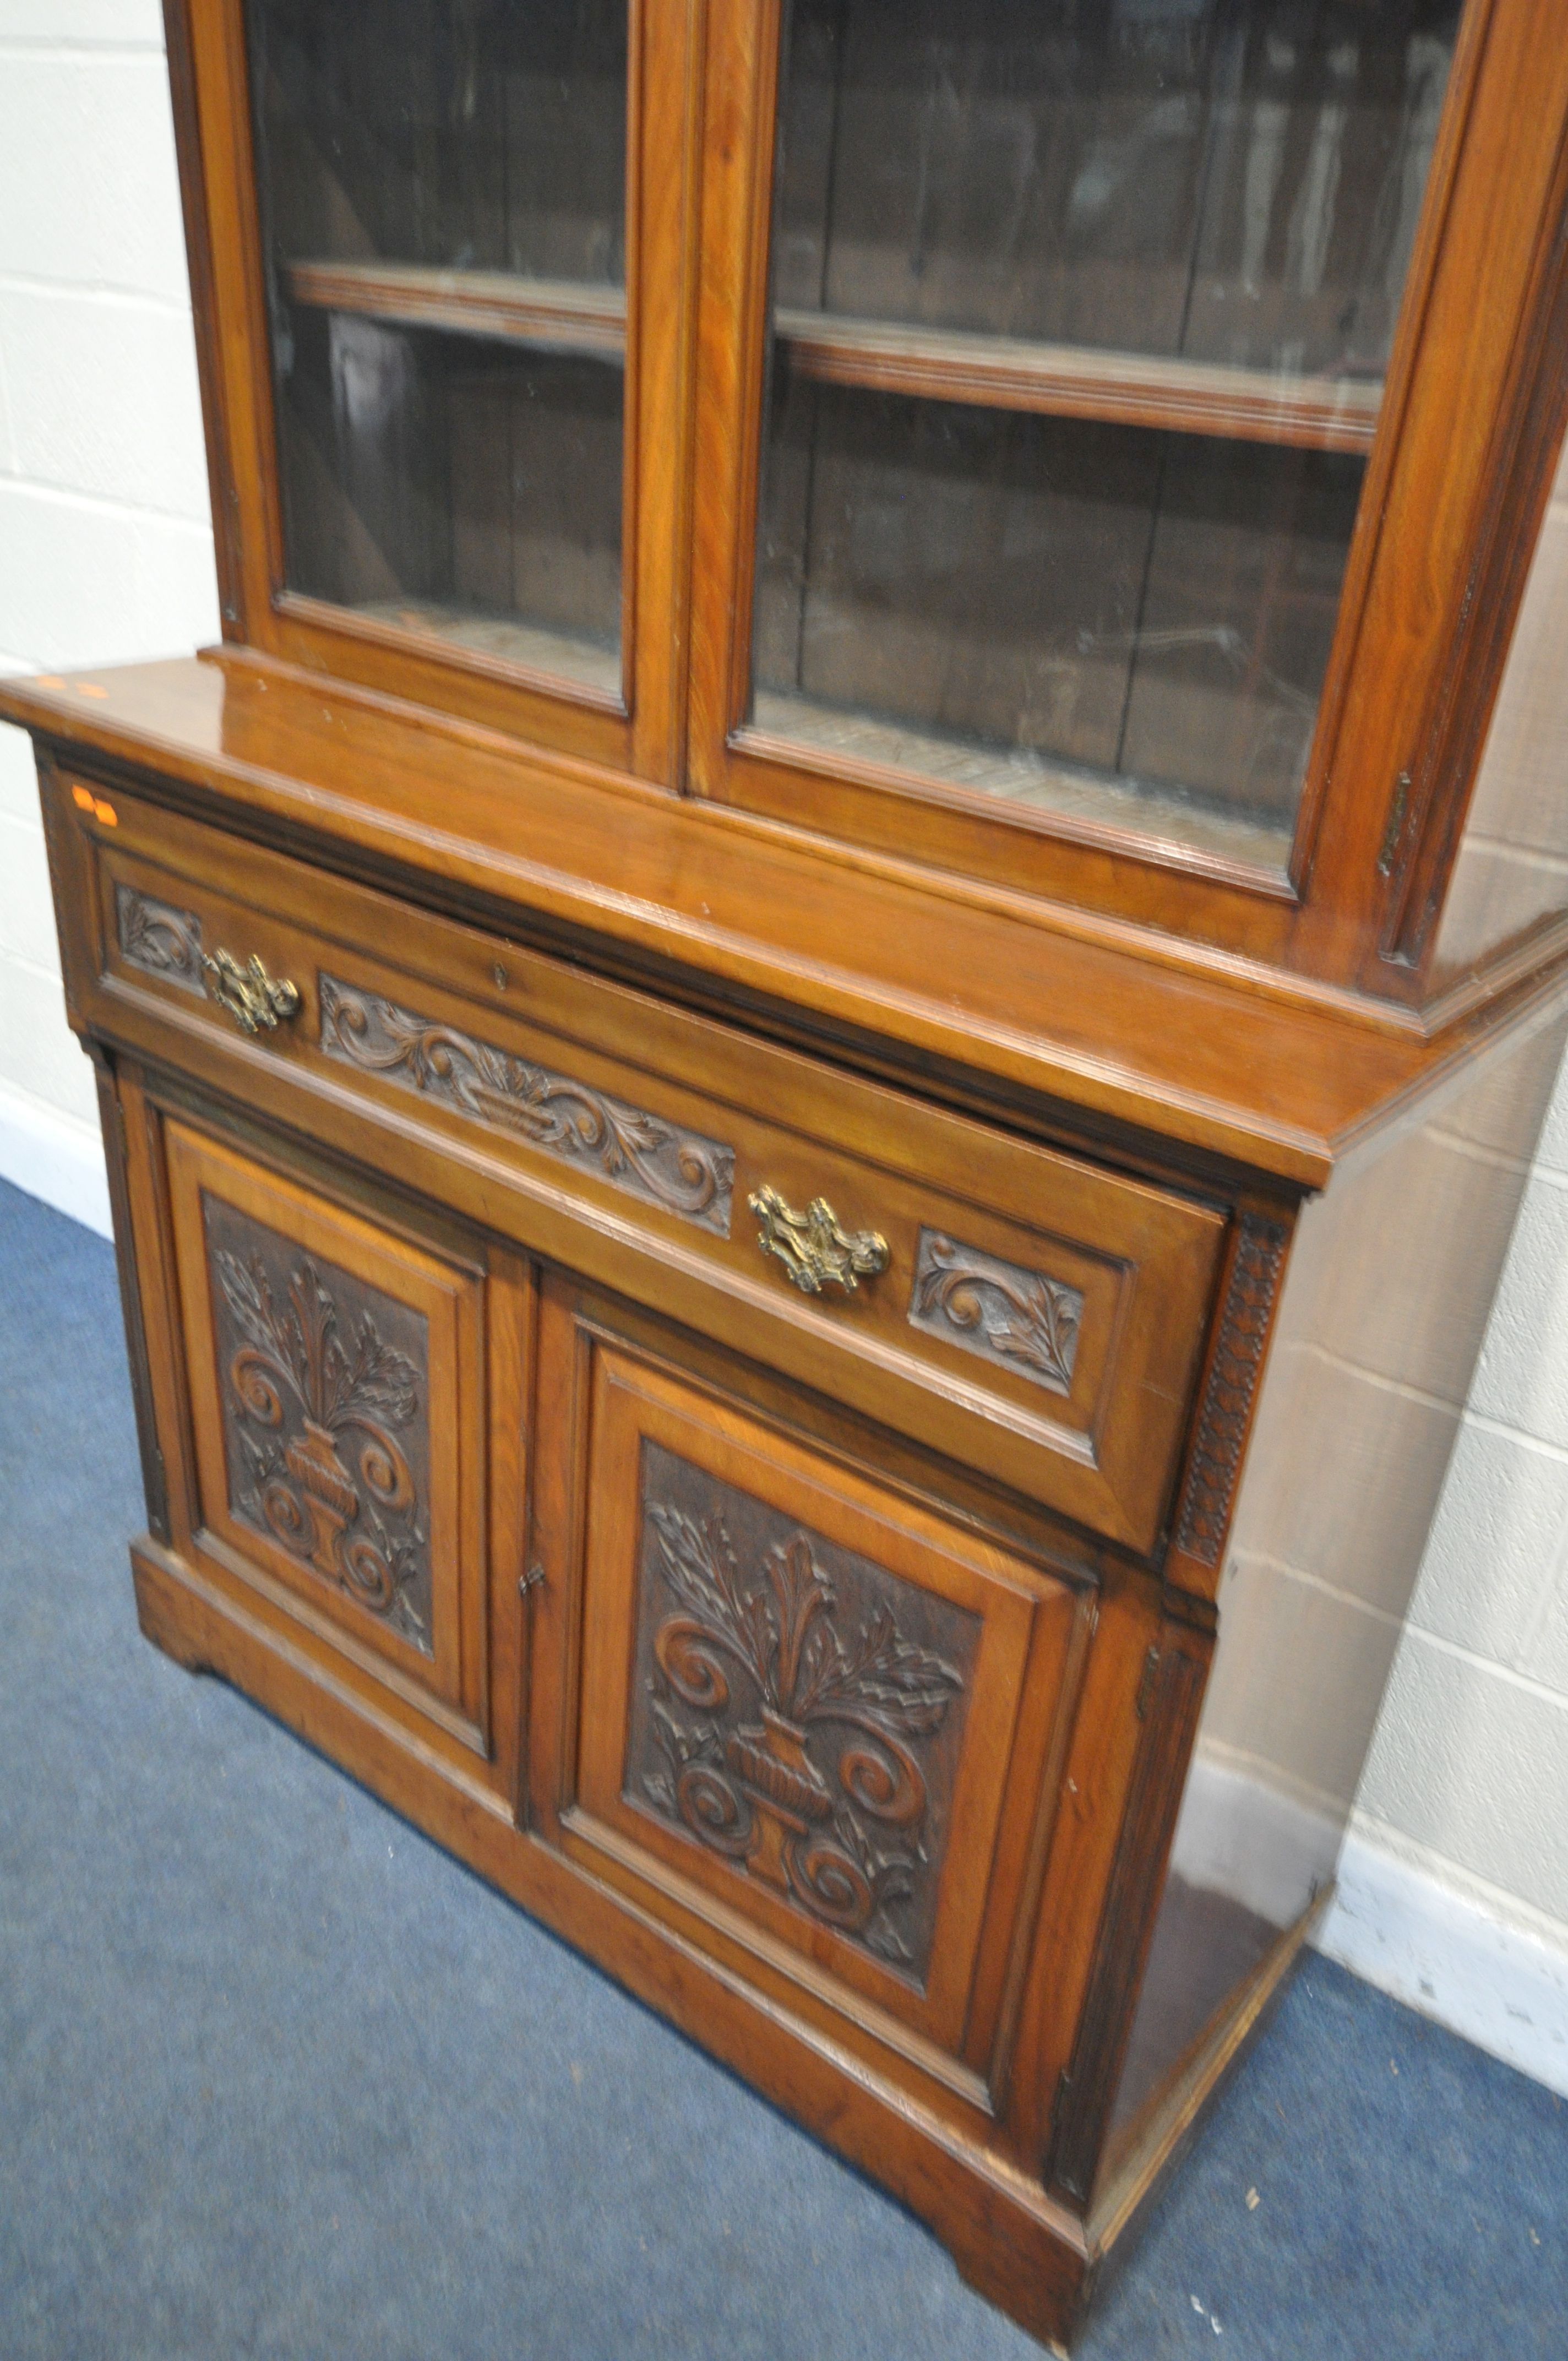 A LATE 19TH/EARLY 20TH CENTURY WALNUT SECRETAIRE BOOKCASE, the top with two glazed doors, over a - Image 3 of 5